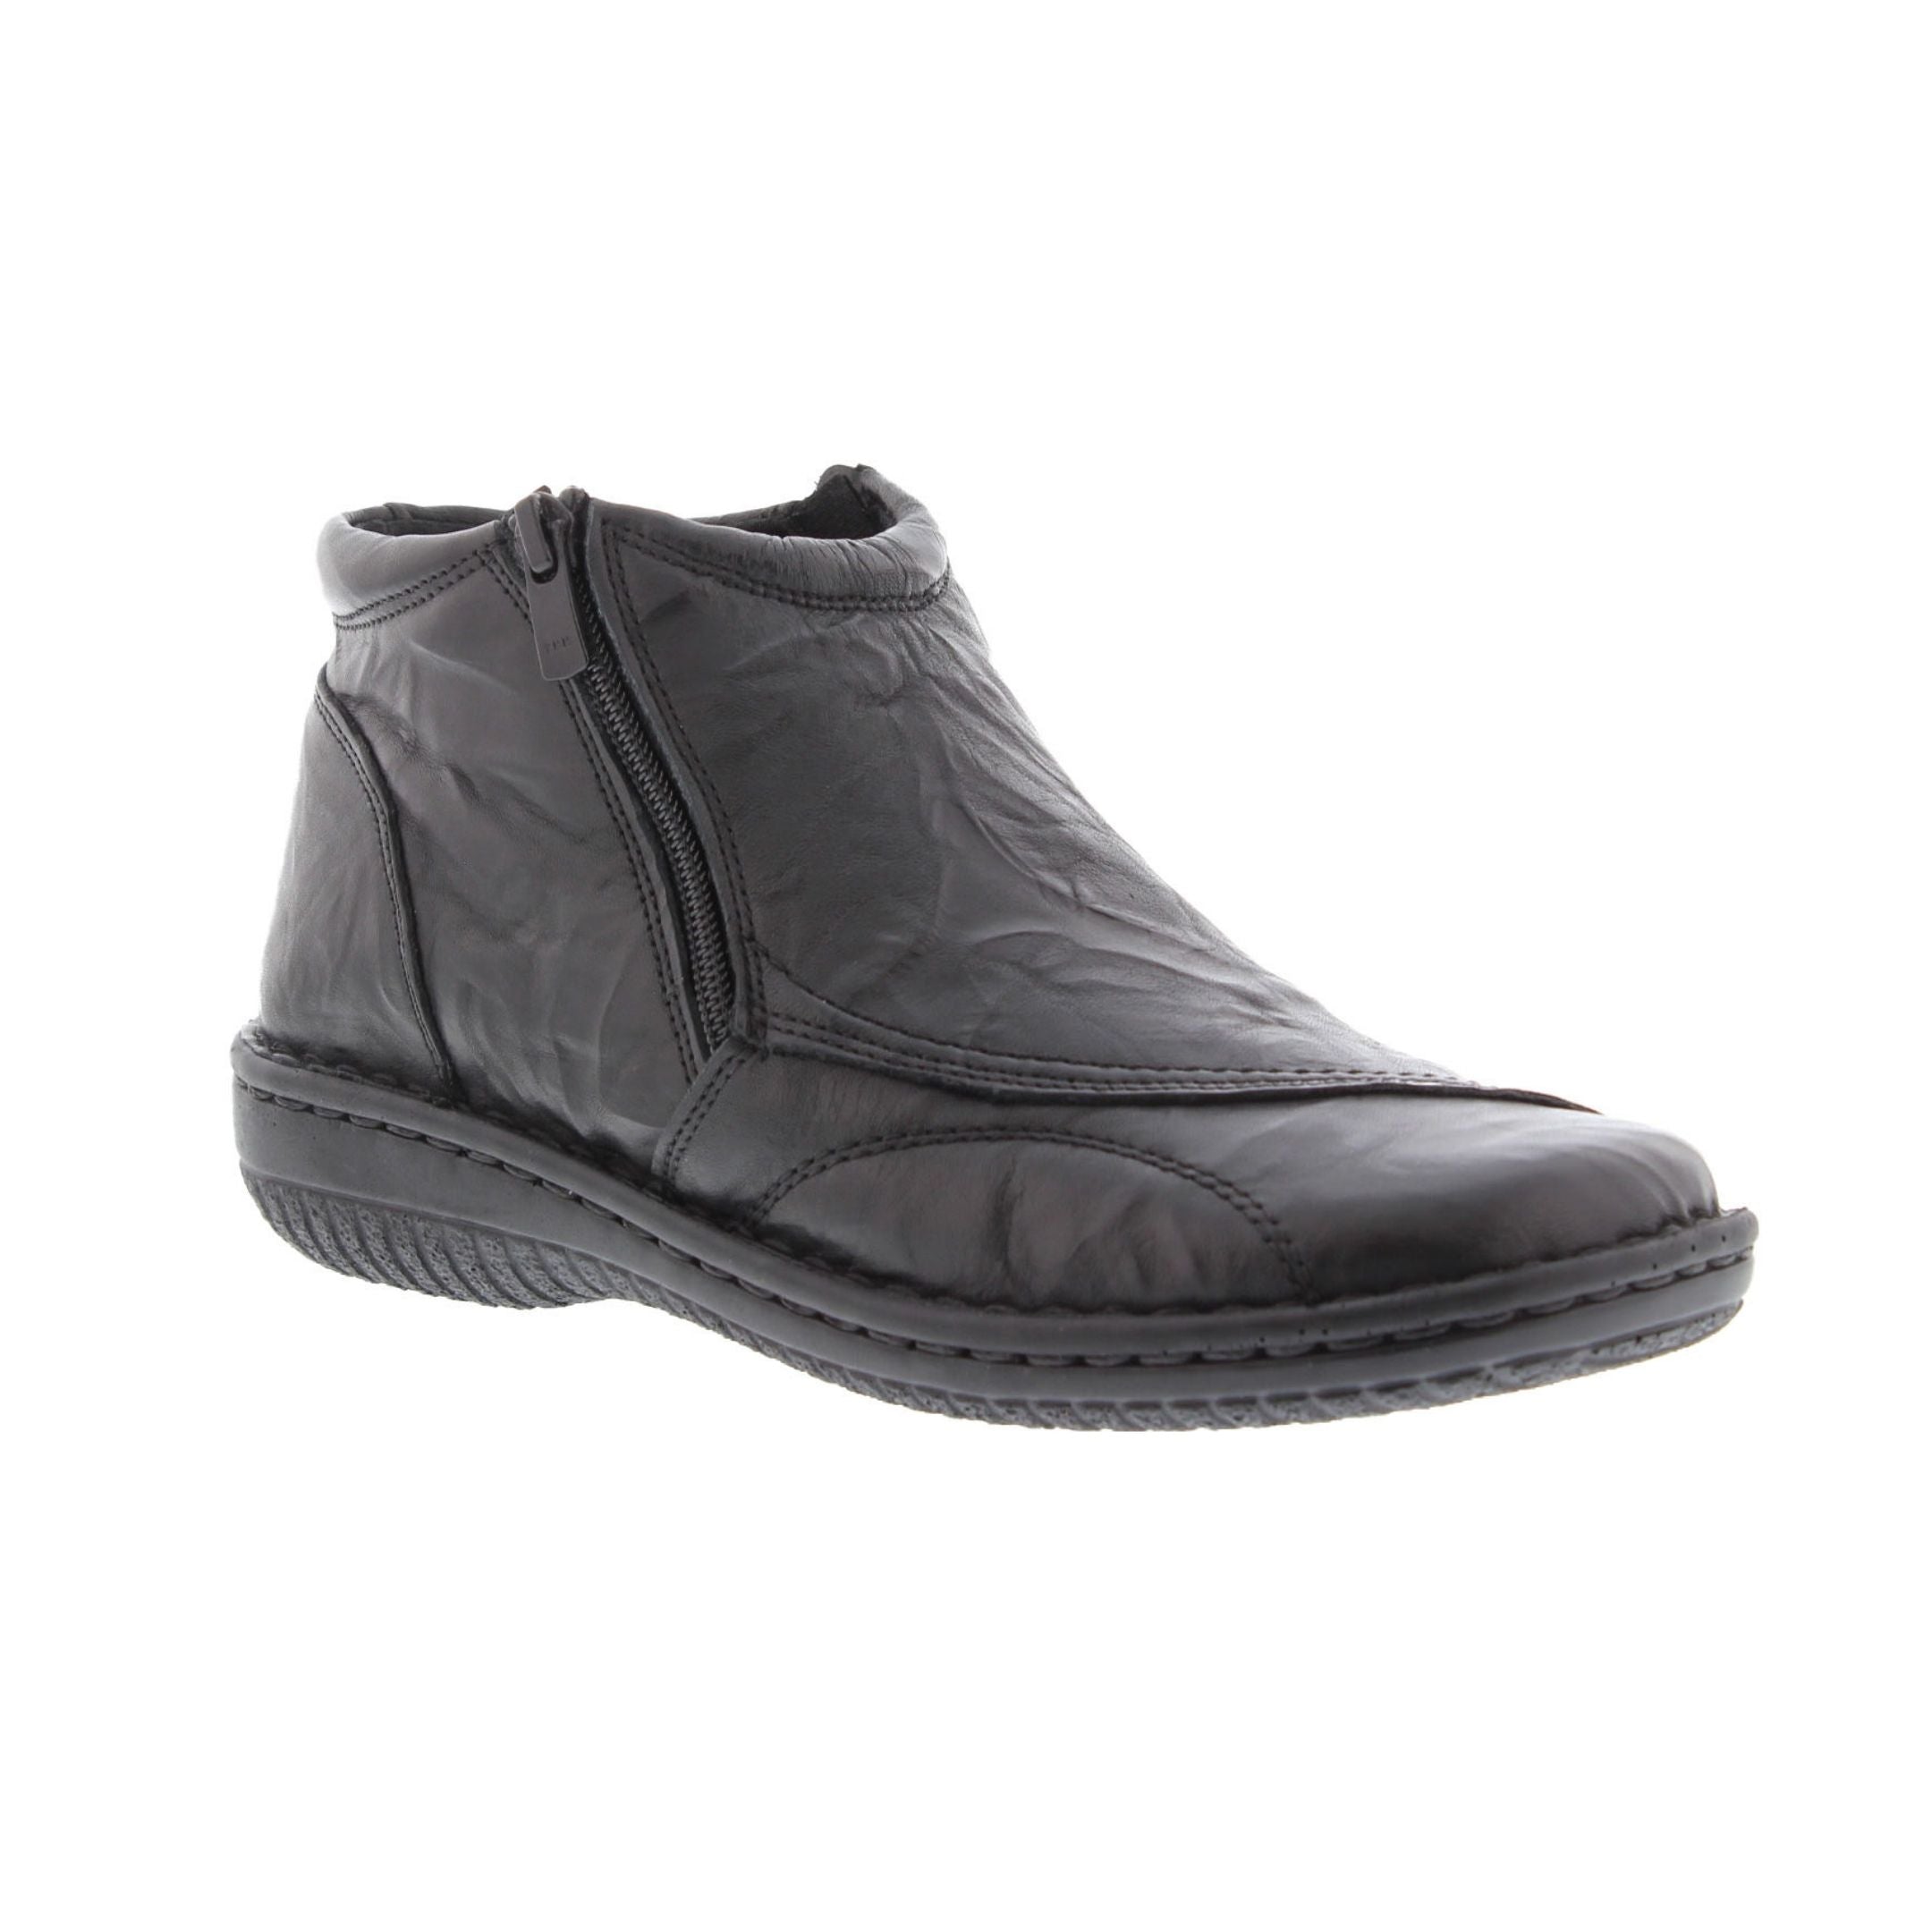 Black Alb ankle boot by Volks Walkers with soft textured upper and side zipper